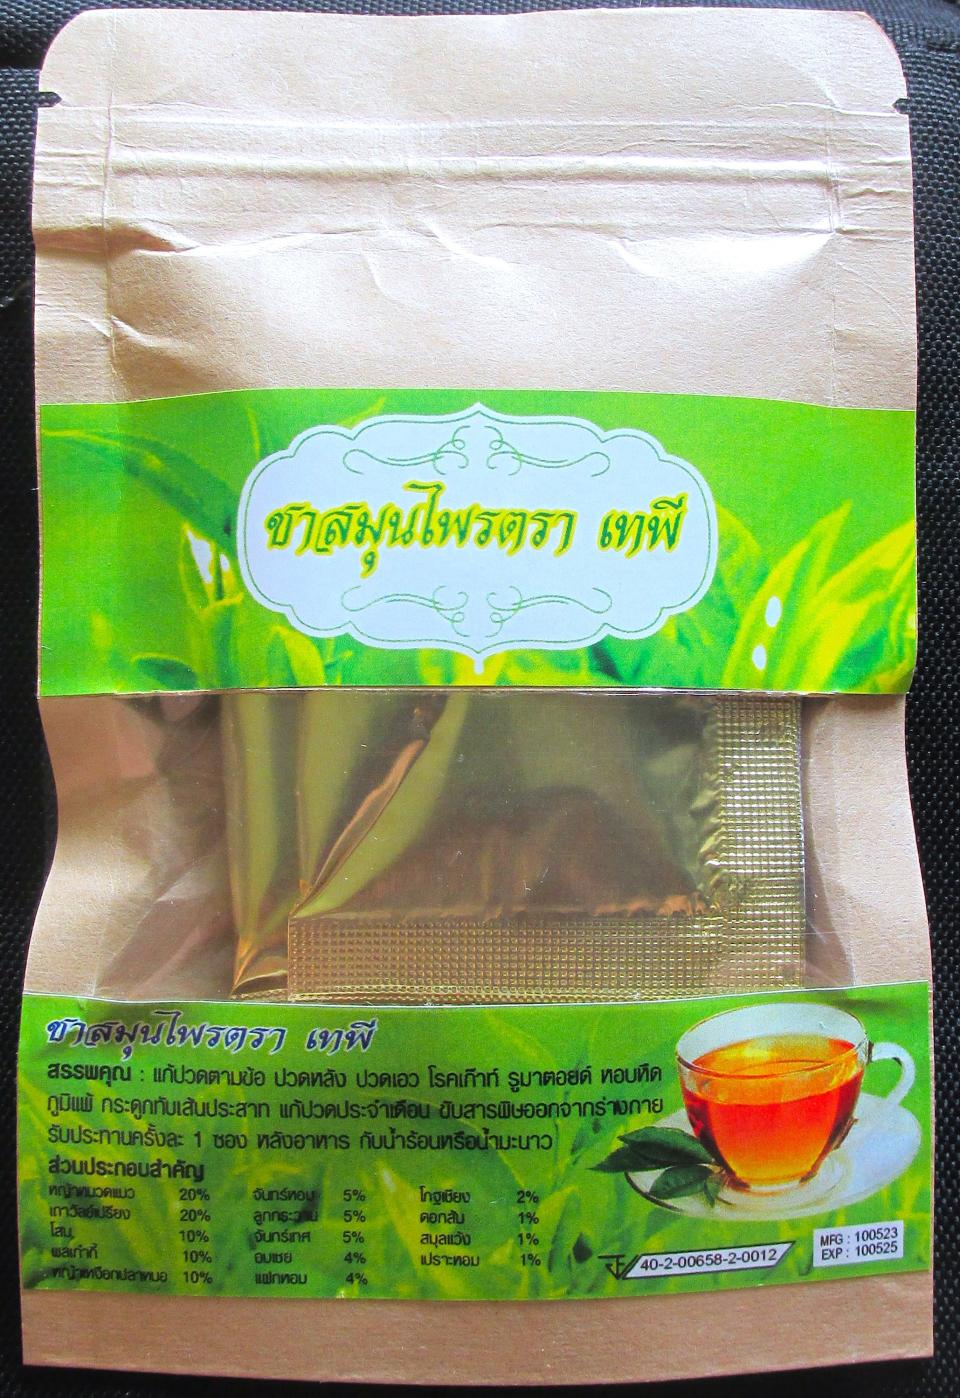 A package of Tapee Tea, which a local physician believes is the same product that is under investigation in Thailand for being laced with steroids.